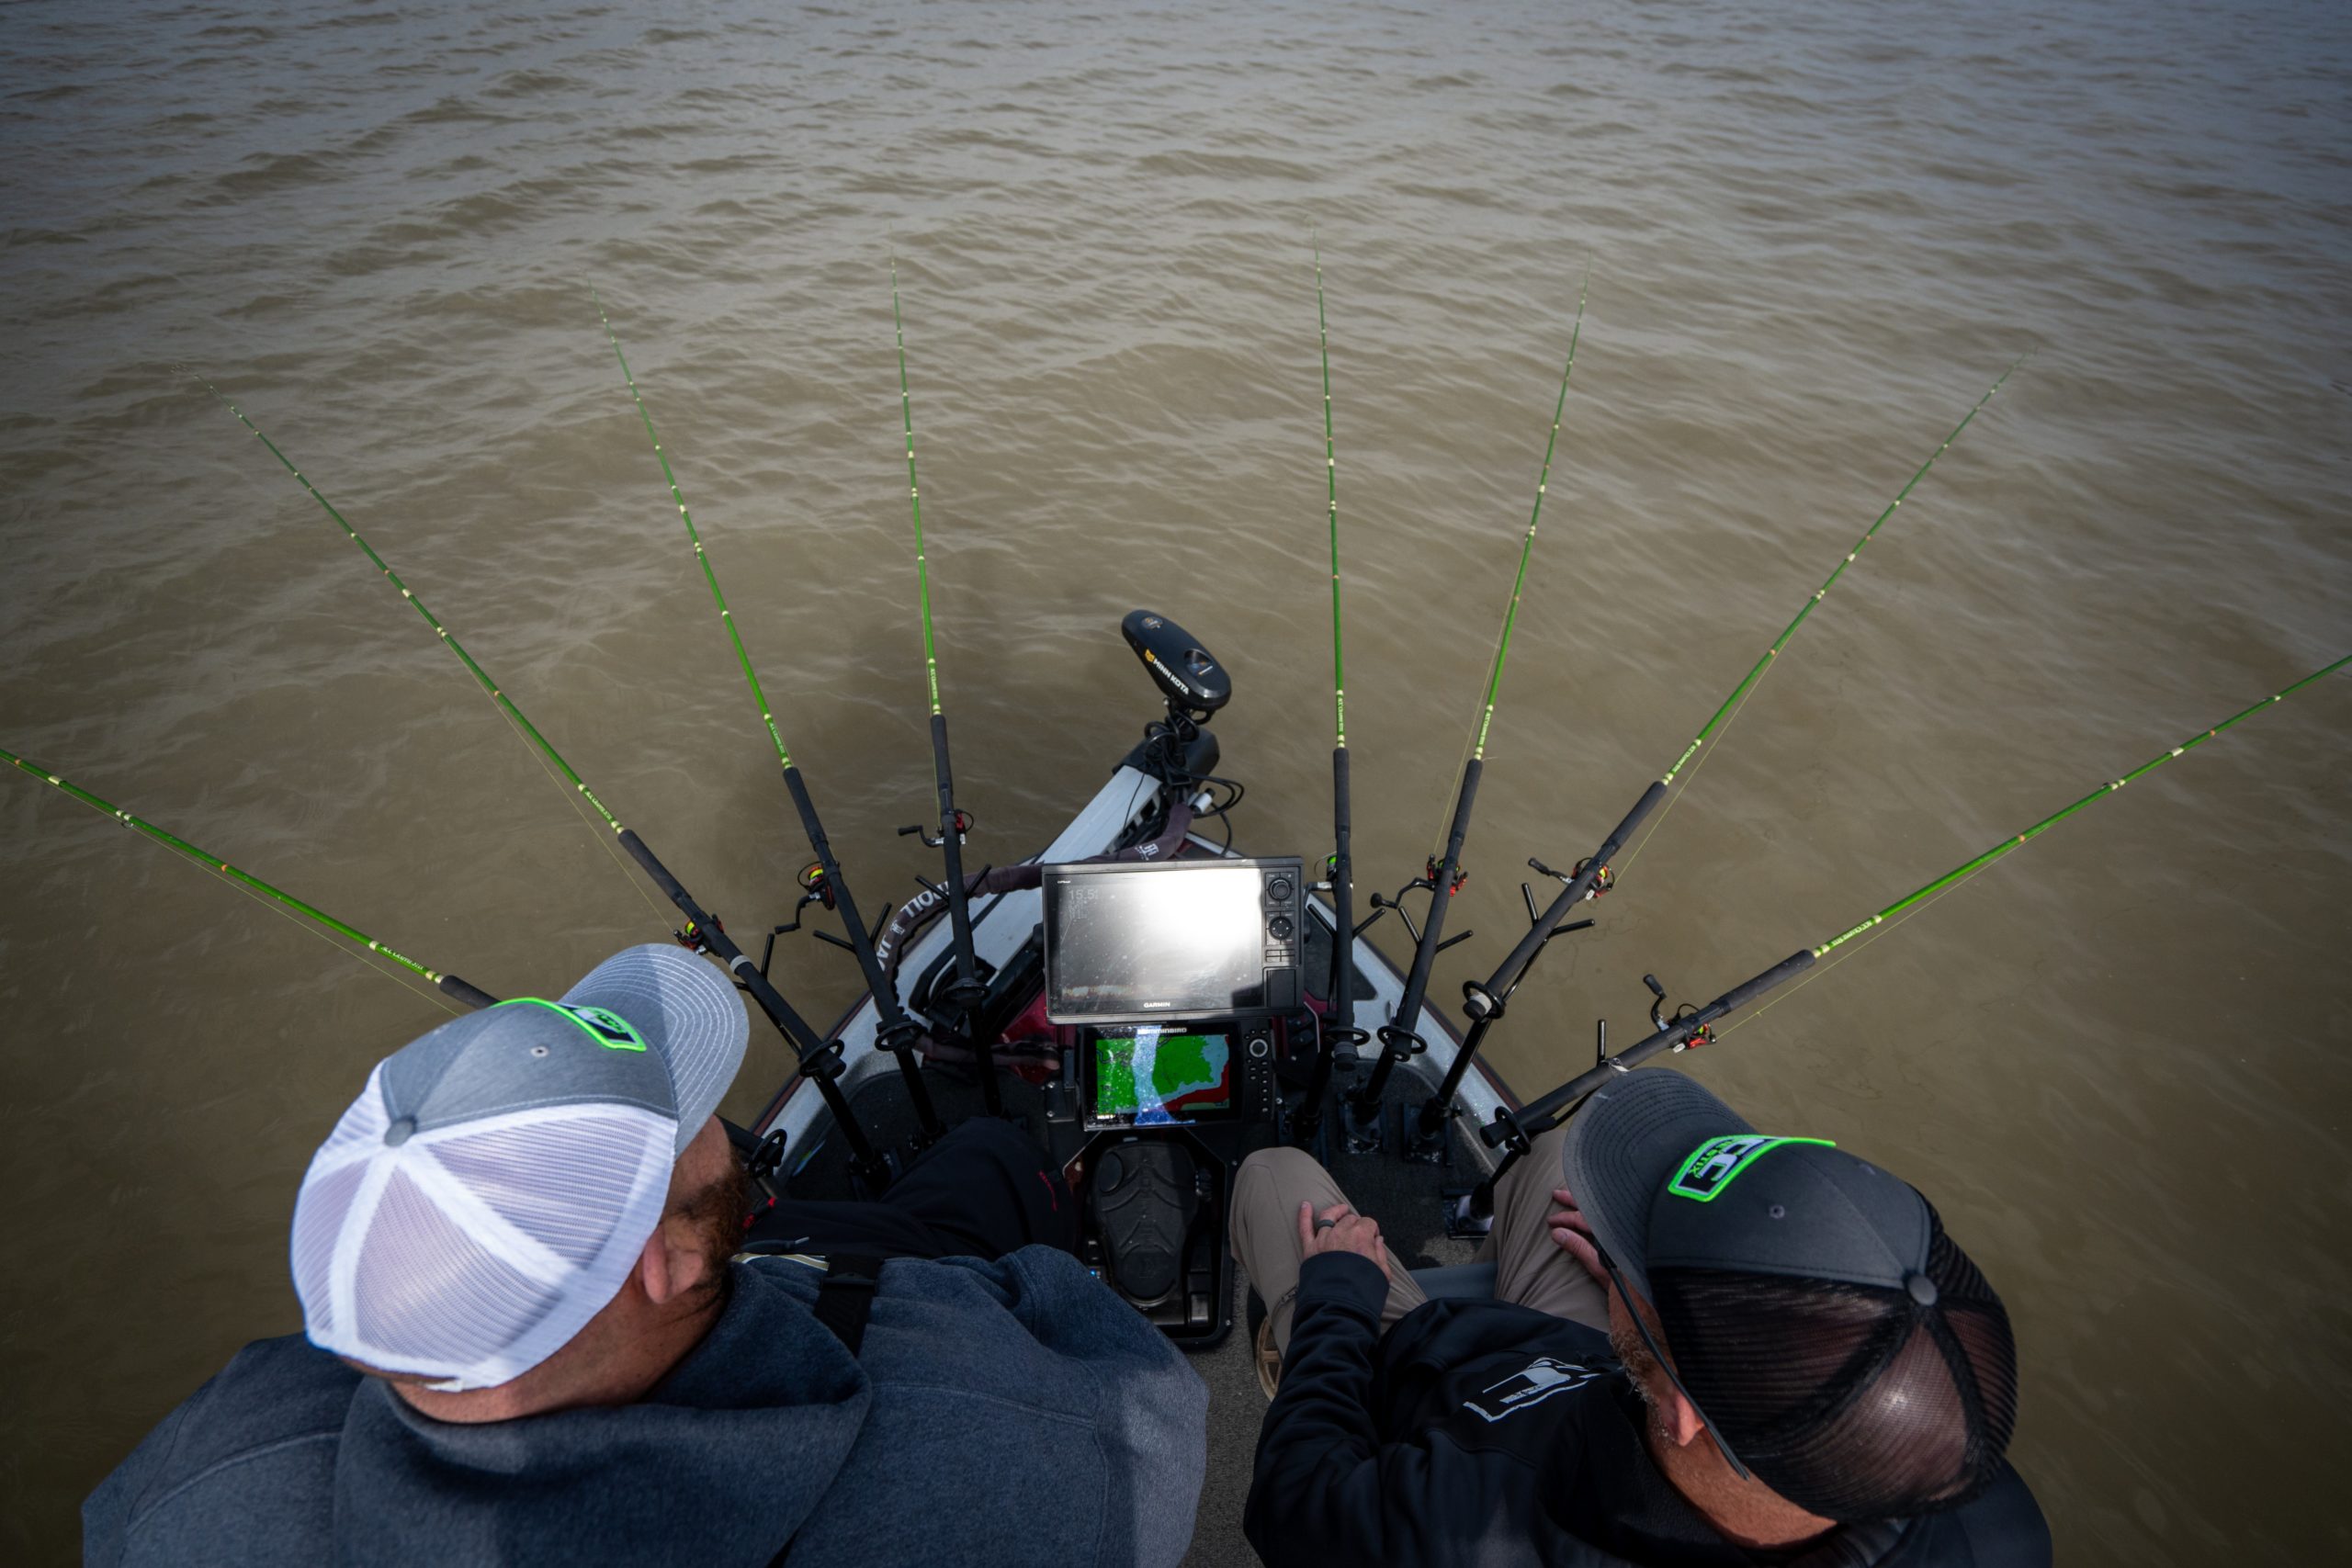 Spider-rigging maintains relevance as crappie fishing continues to